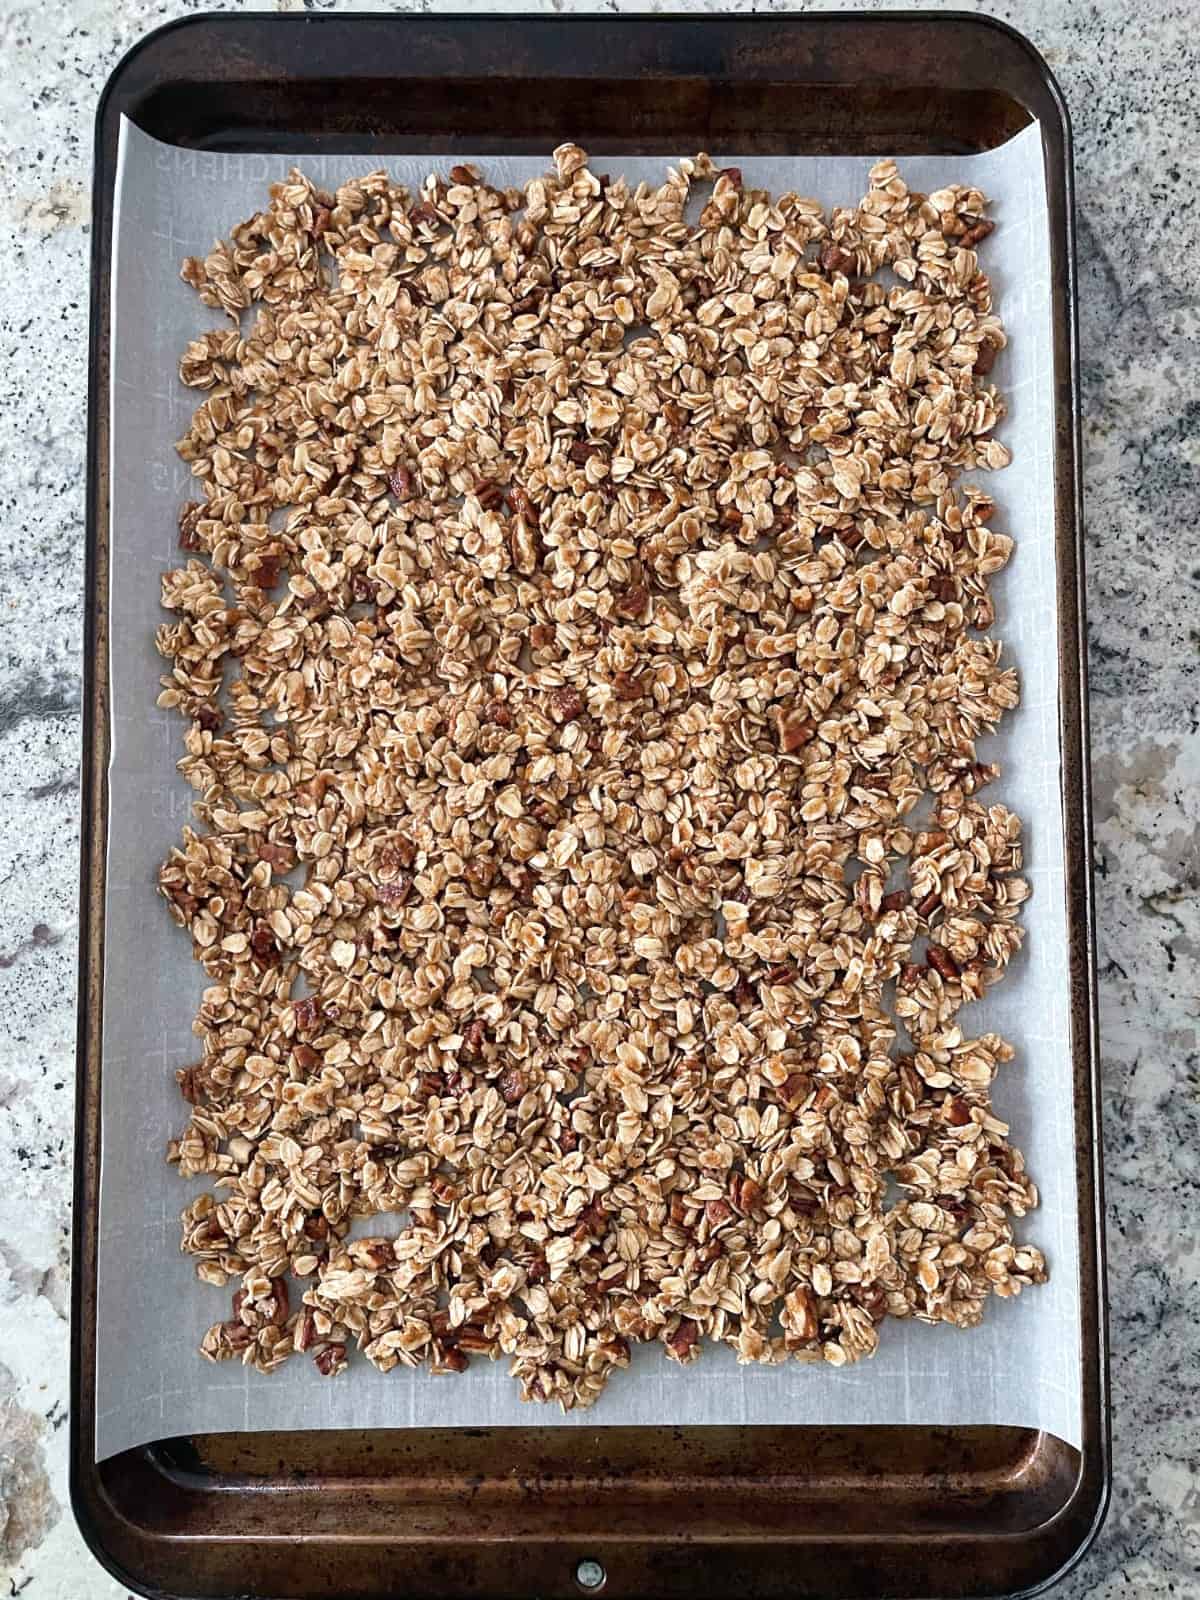 Unbaked granola on parchment-lined baking sheet.